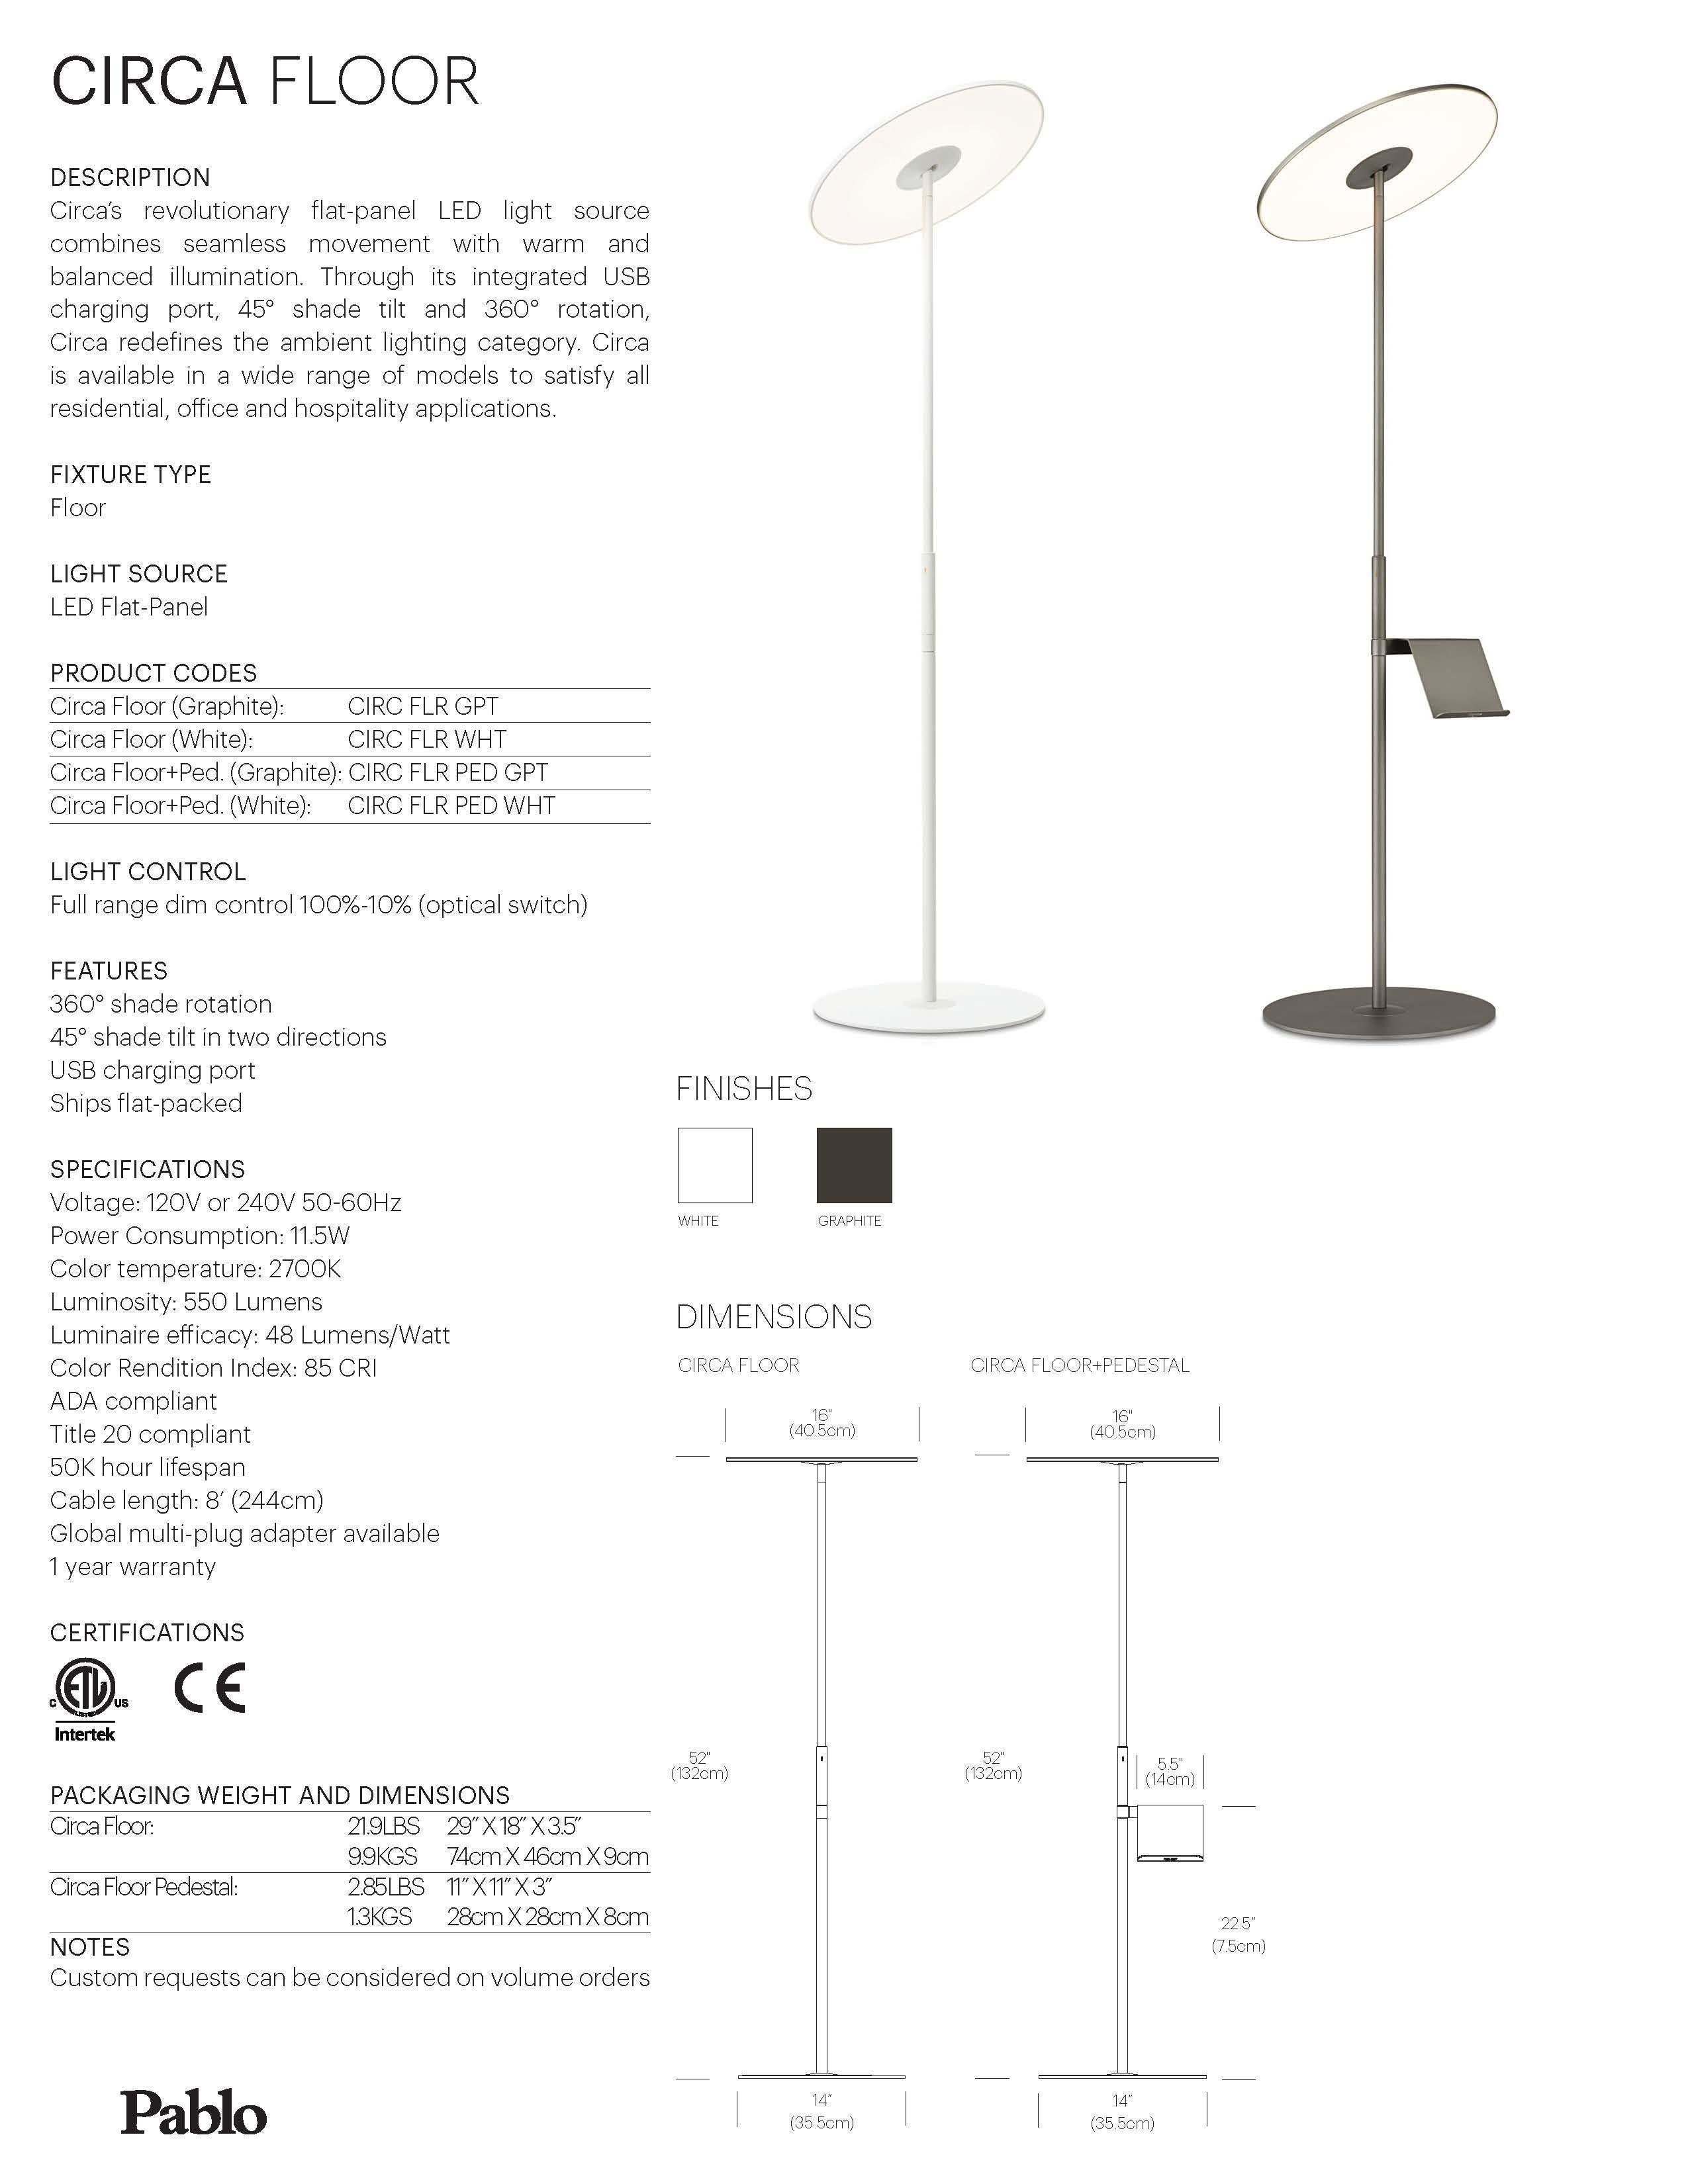 Stehlampe 